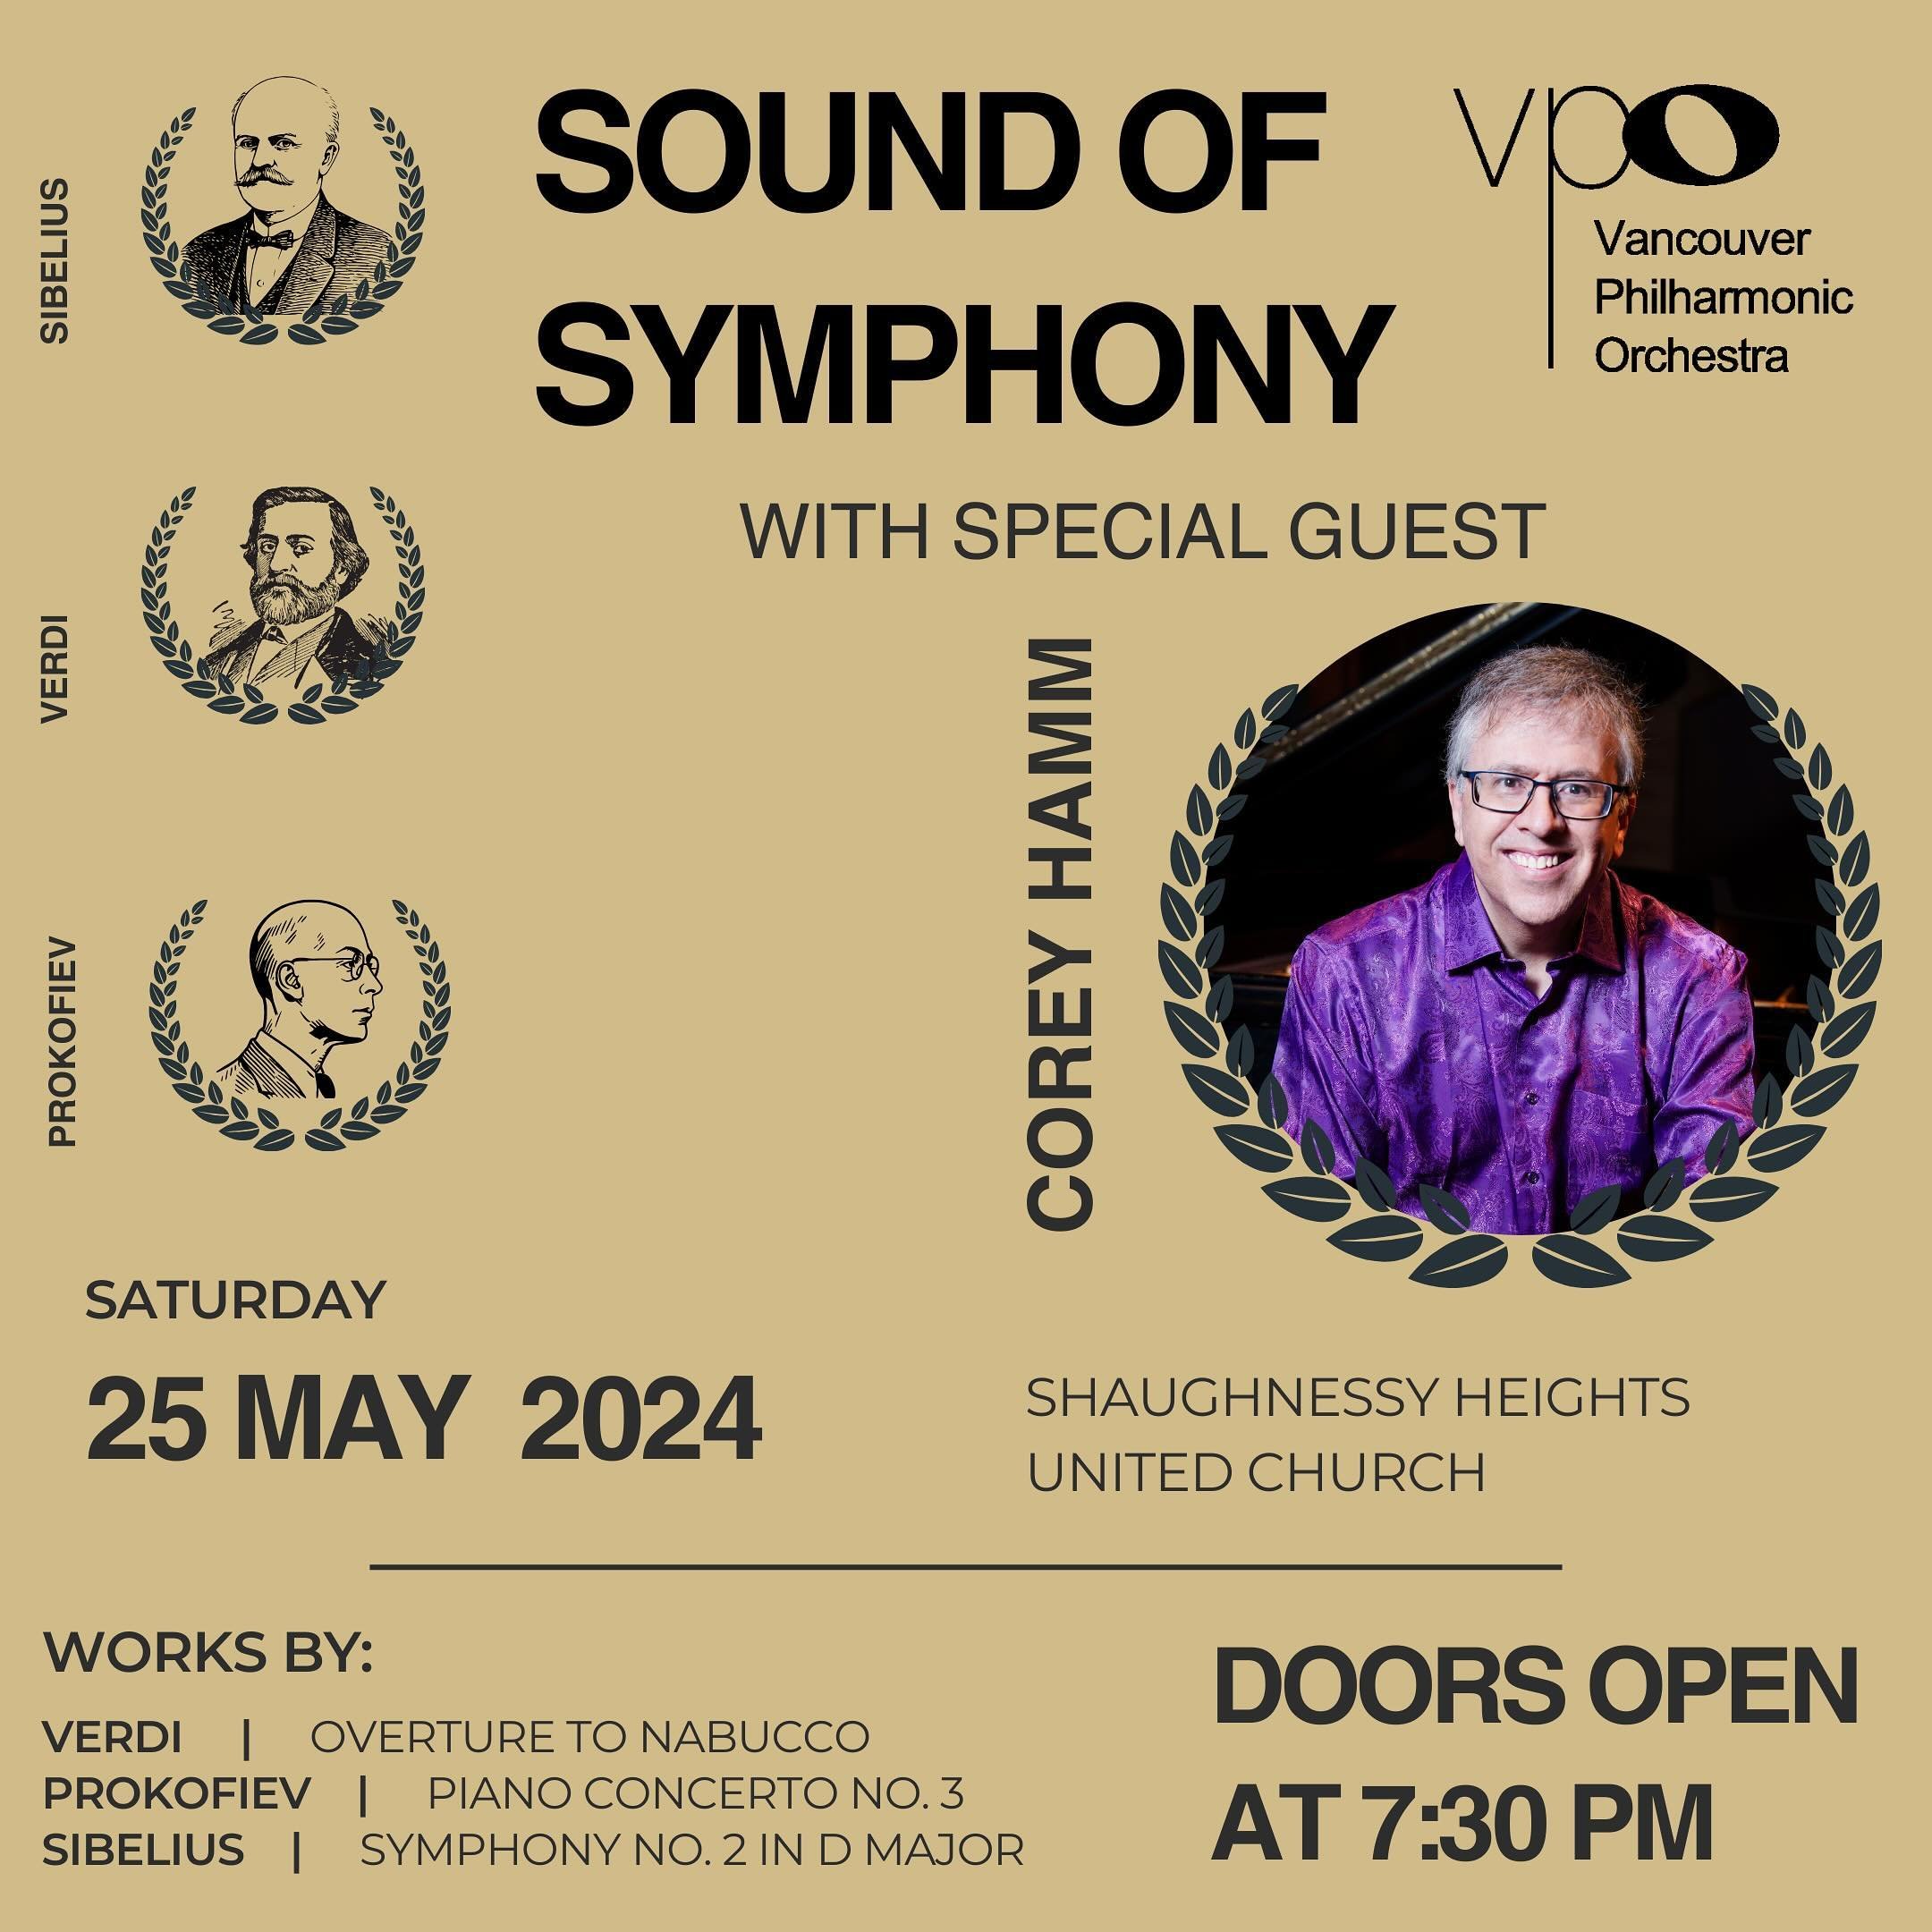 Get your tickets now for &ldquo;SOUND OF SYMPHONY&rdquo; presented by the Vancouver Philharmonic! On Saturday May 25, 2024 at 8:00pm, hear special guest soloist, Corey Hamm, perform the daunting Prokofiev Piano Concerto No. 3. Also on the program is 